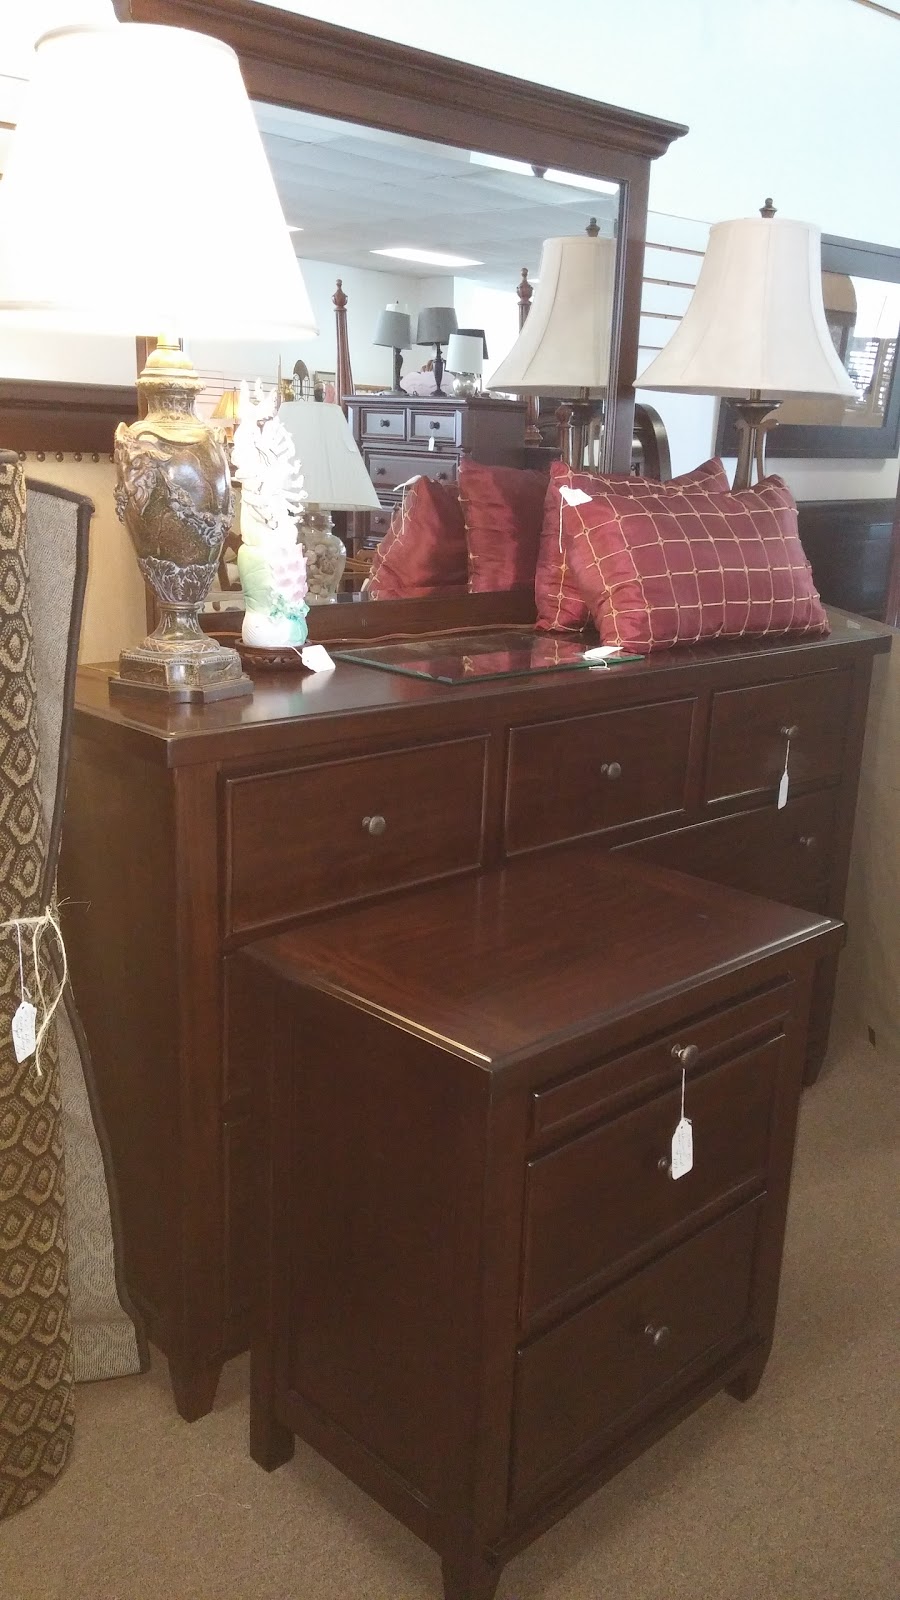 Pats Home Consignment | 1704 W Bay Dr, Largo, FL 33770, USA | Phone: (727) 588-2529